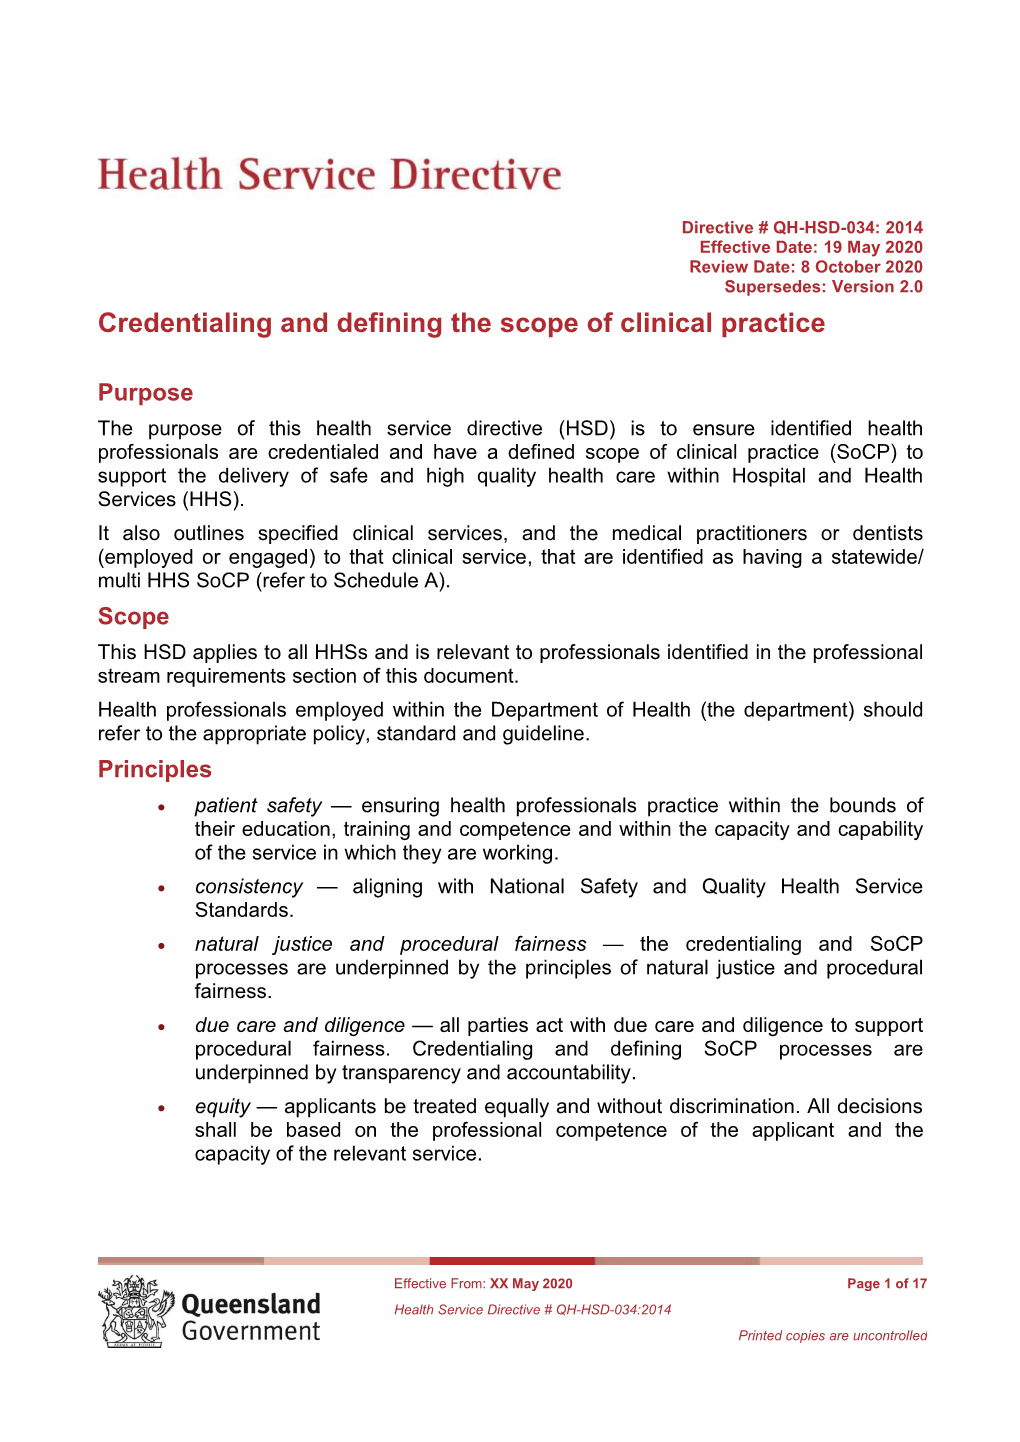 Credentialing and Defining the Scope of Clinical Practice